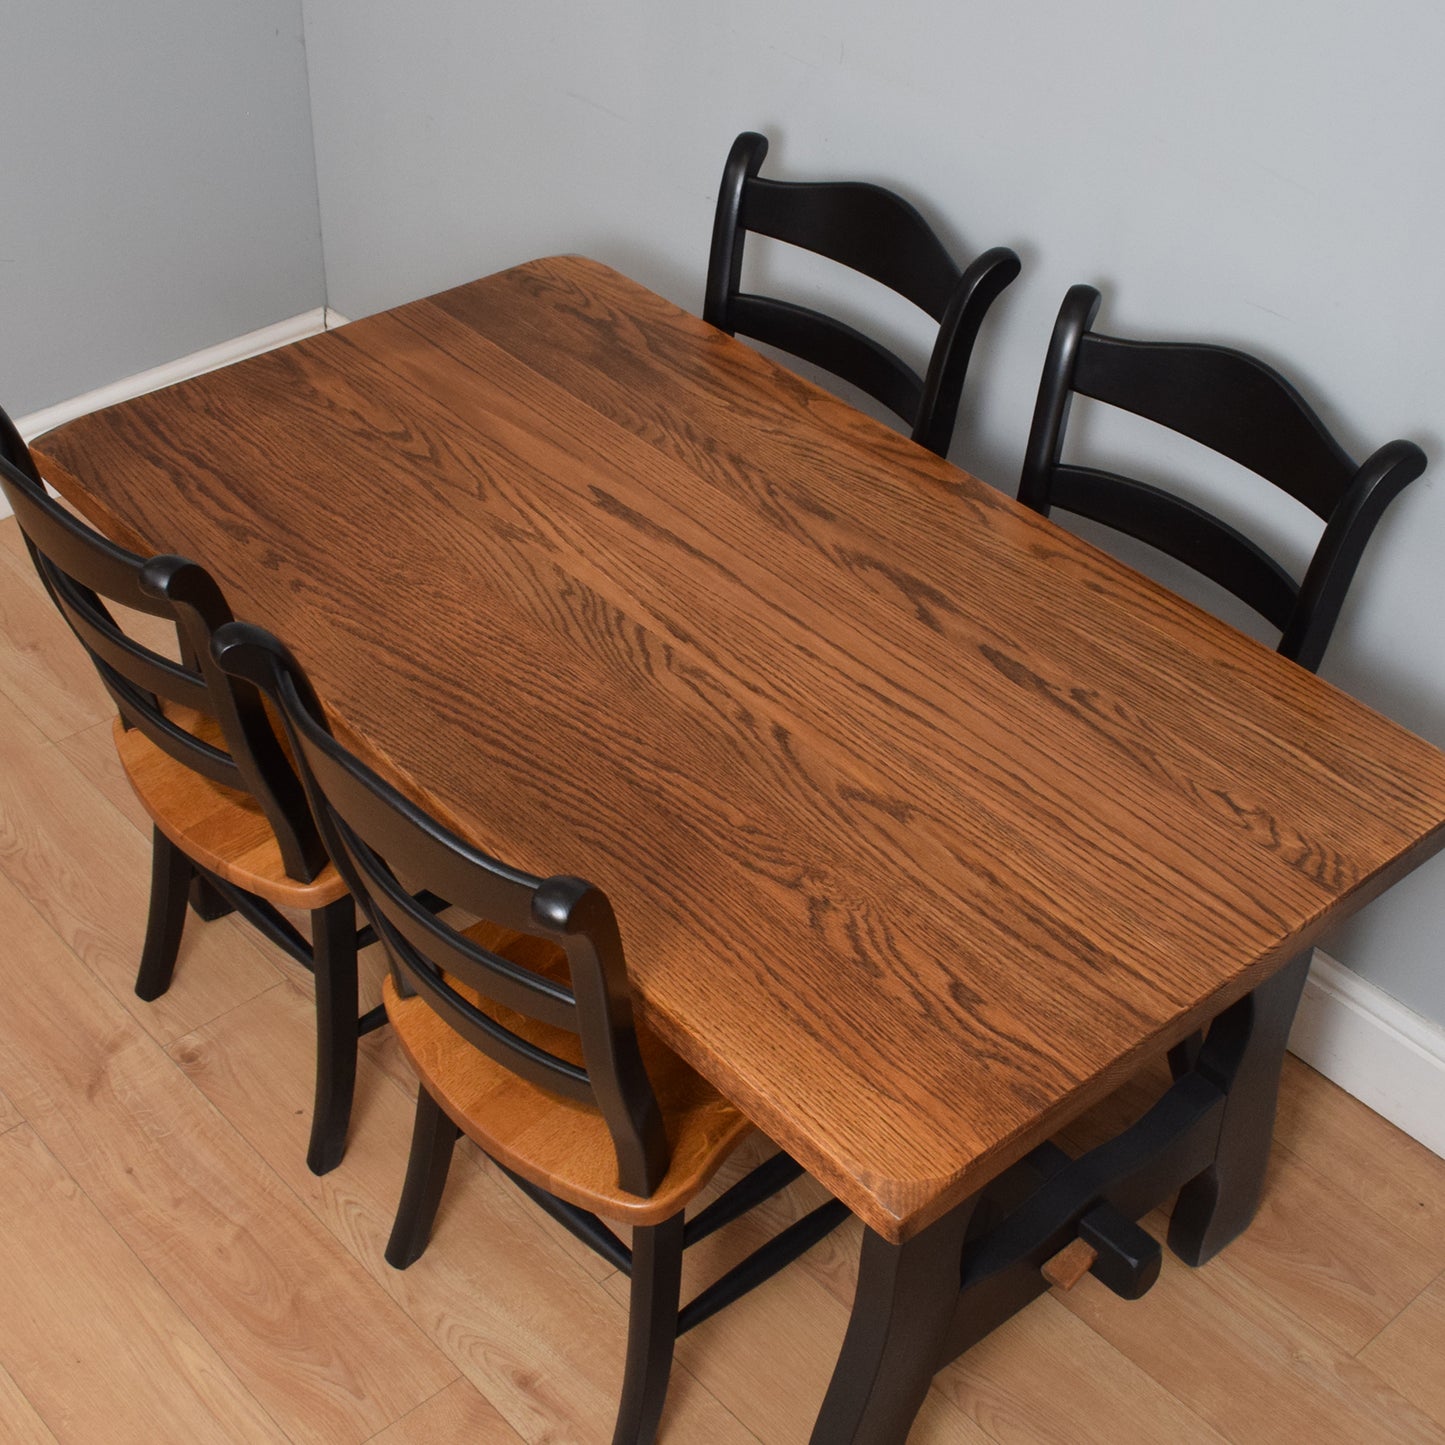 Painted Oak Dining Table and Four Chairs